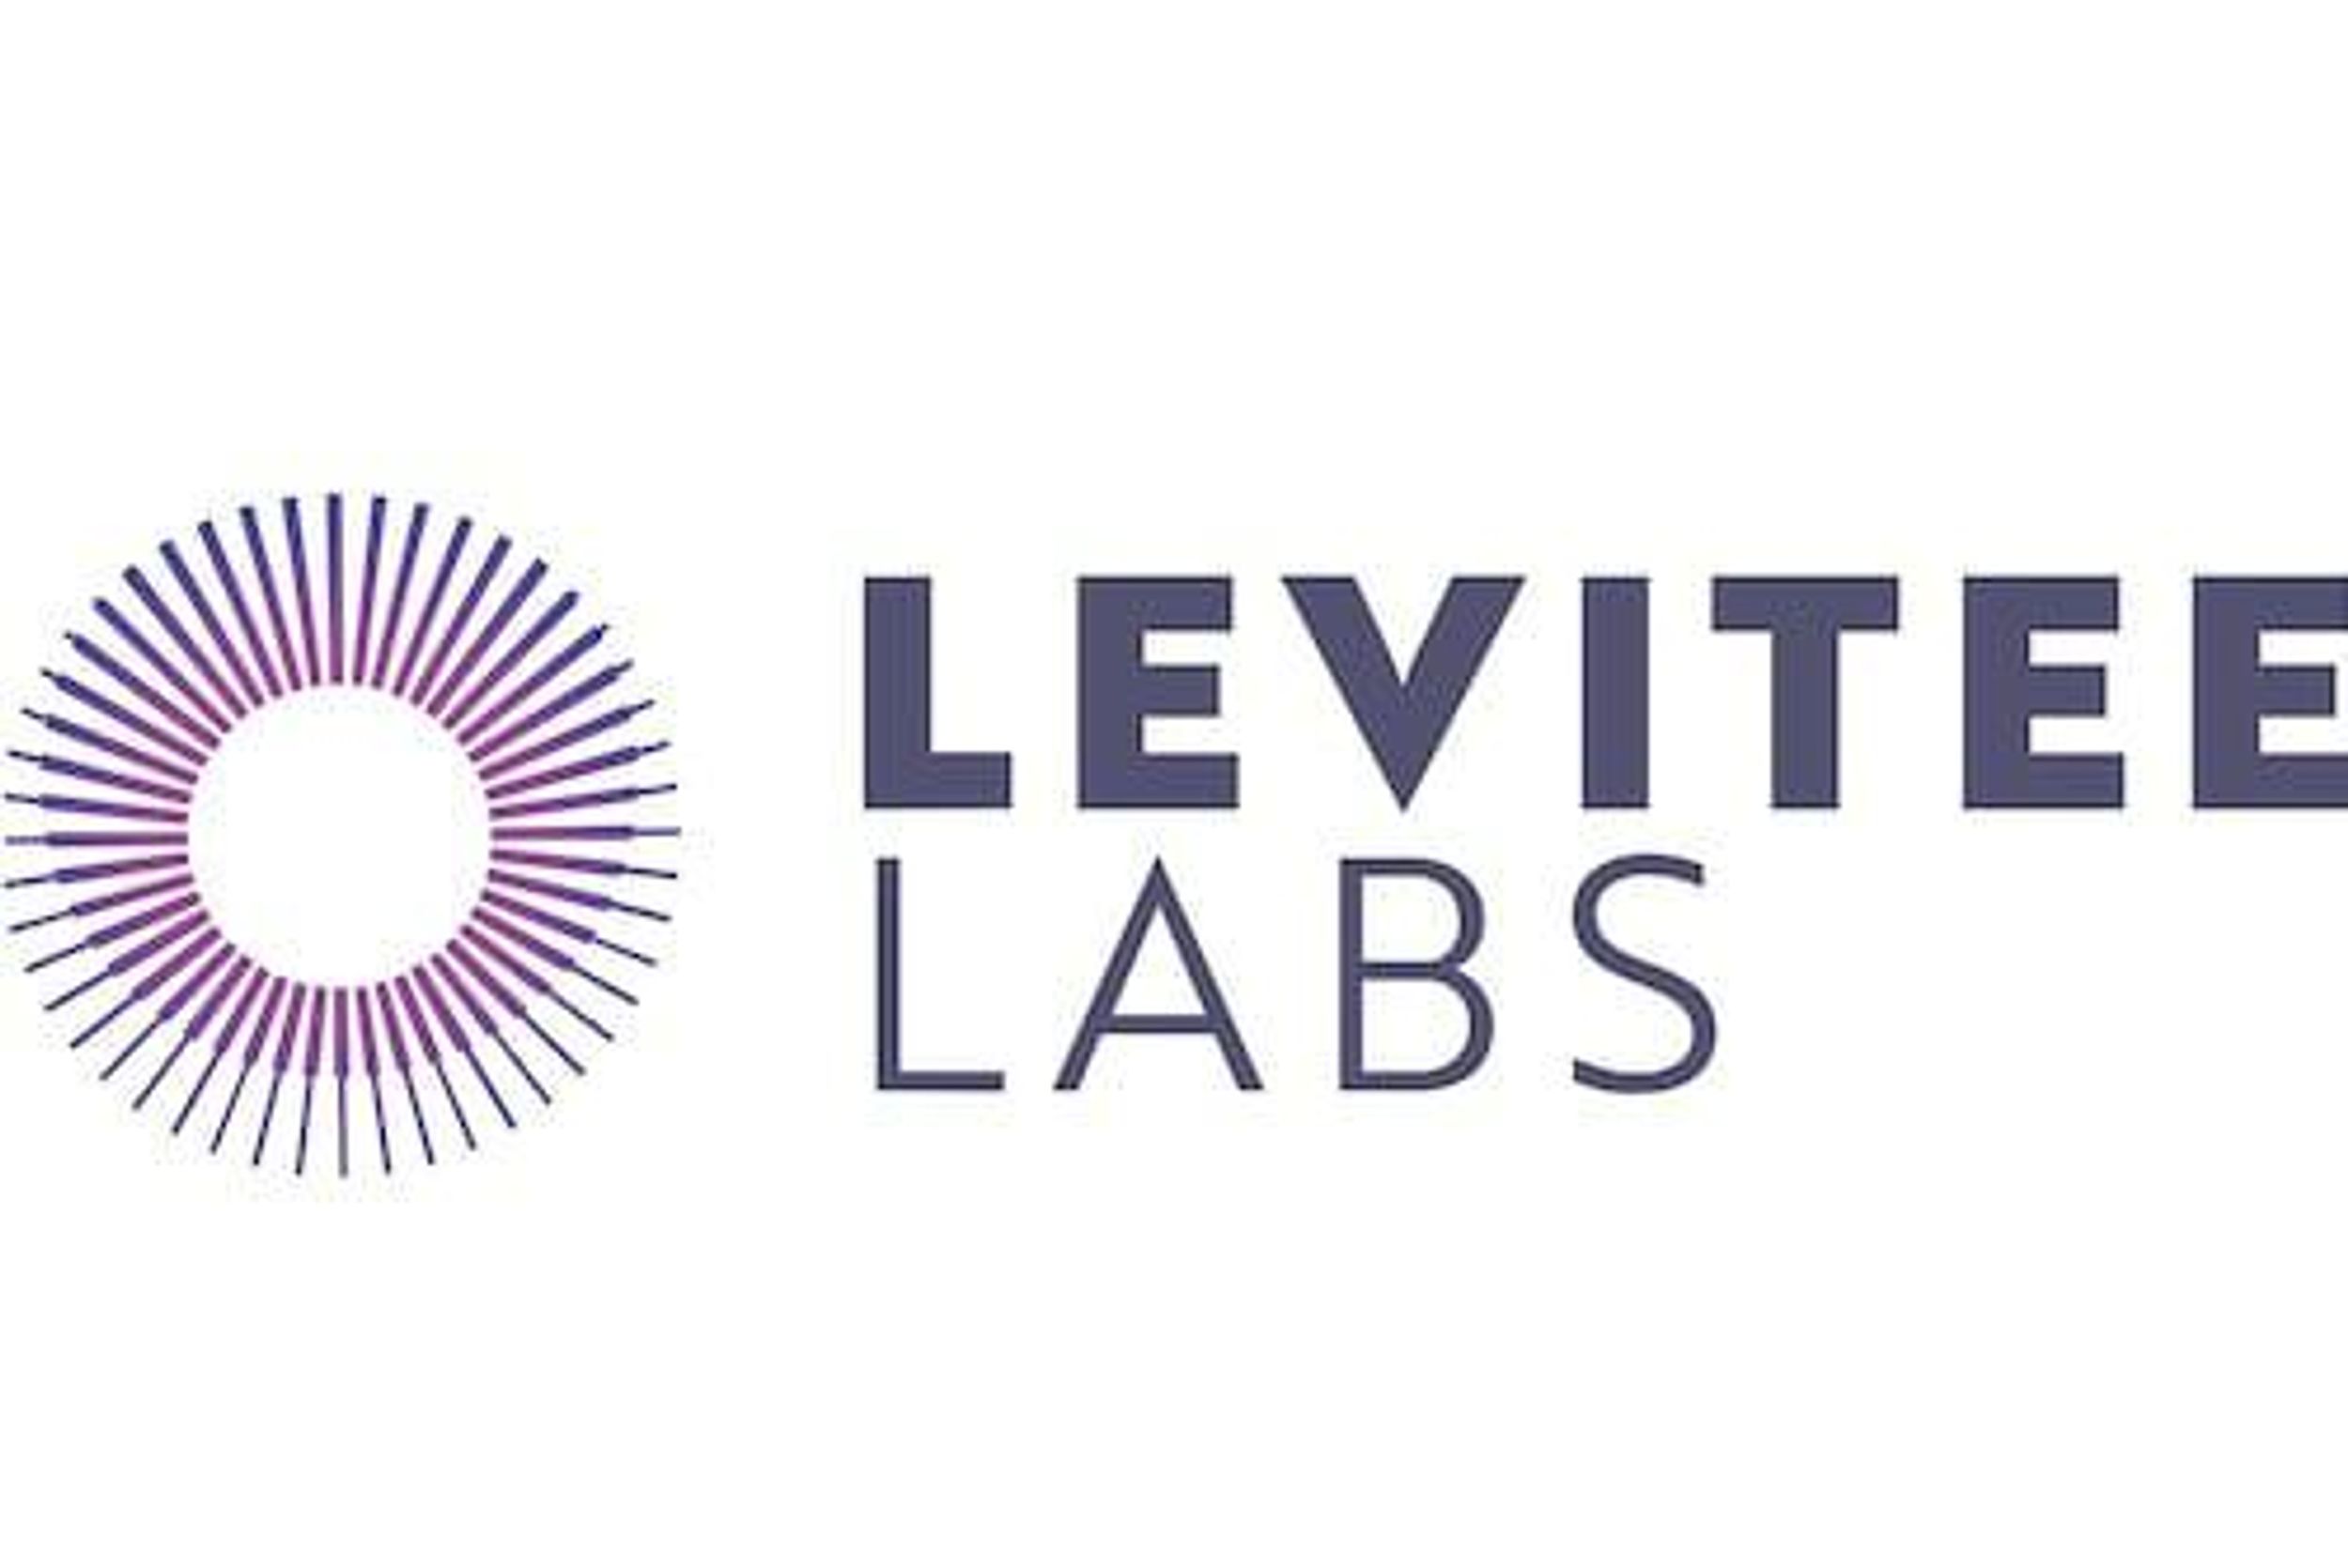 Levitee Labs Announces Non-Brokered Private Placement of up to $3,000,000